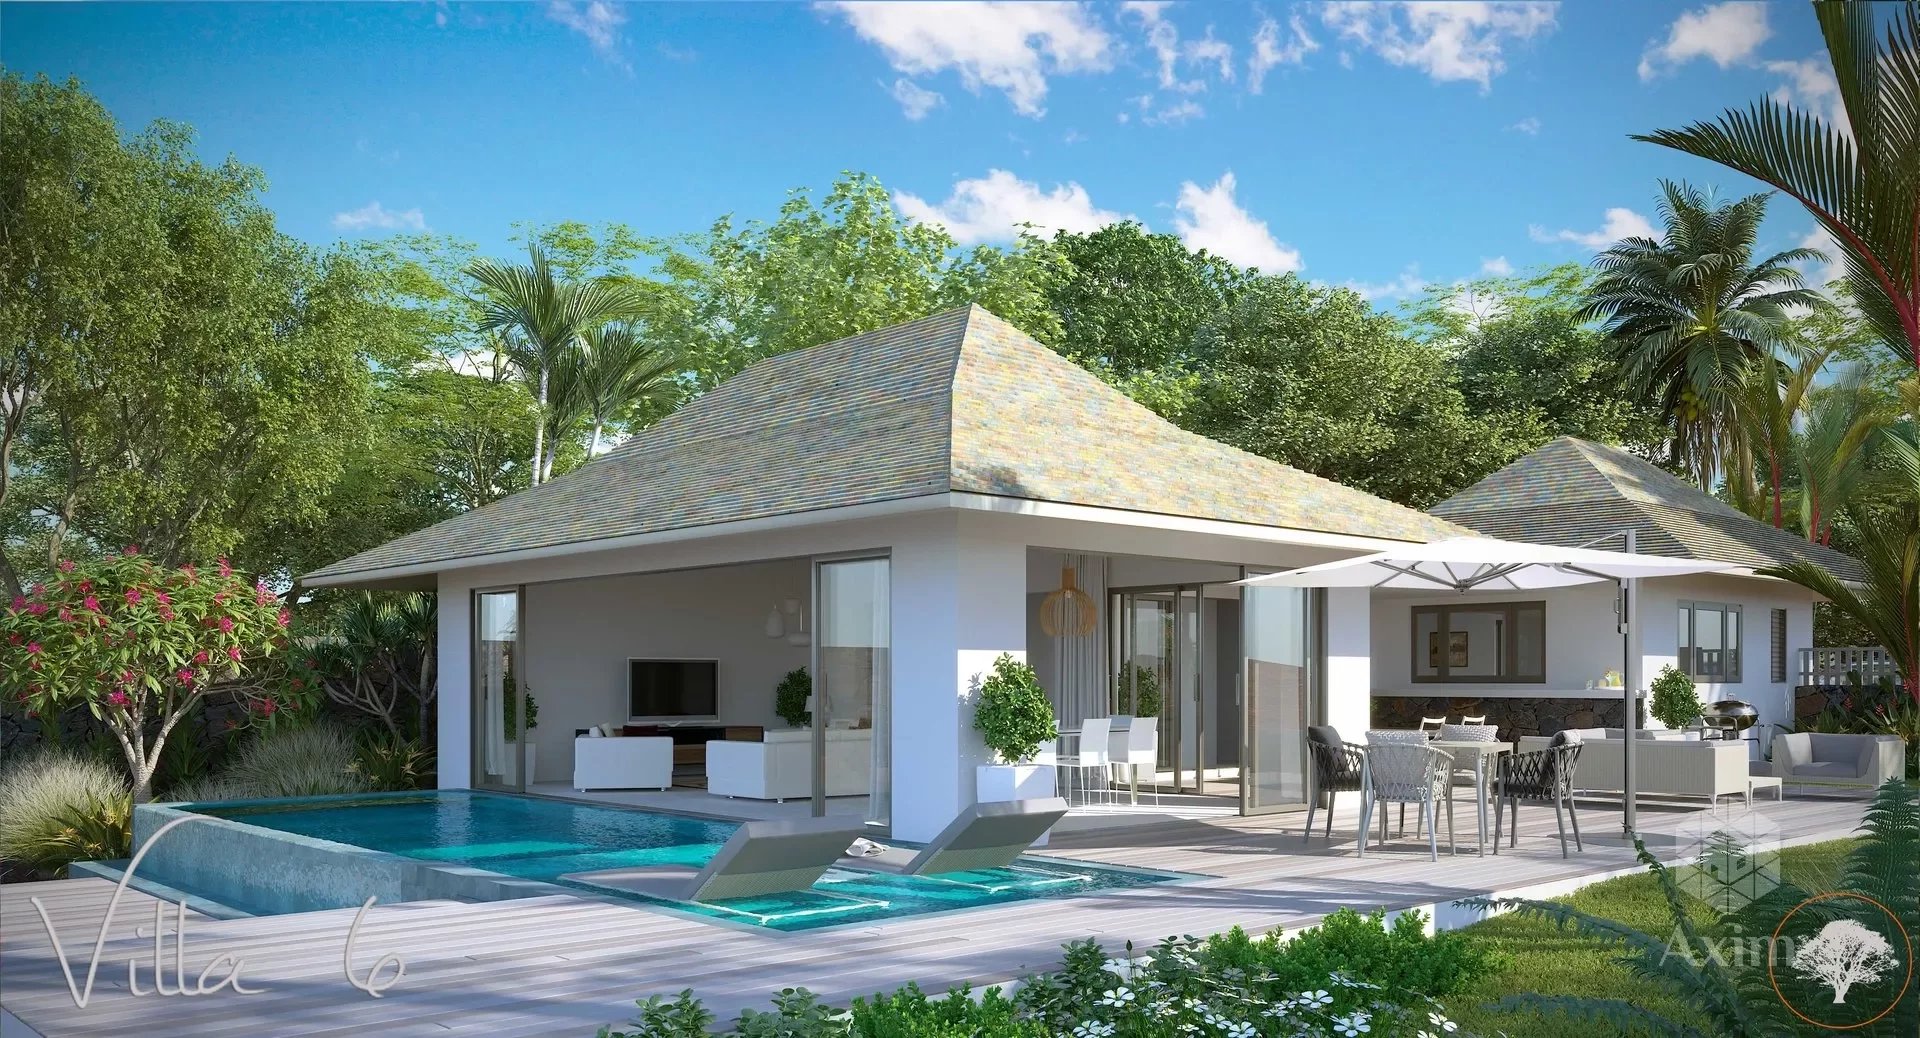 6 luxury villas between sea and mountains in the heart of nature